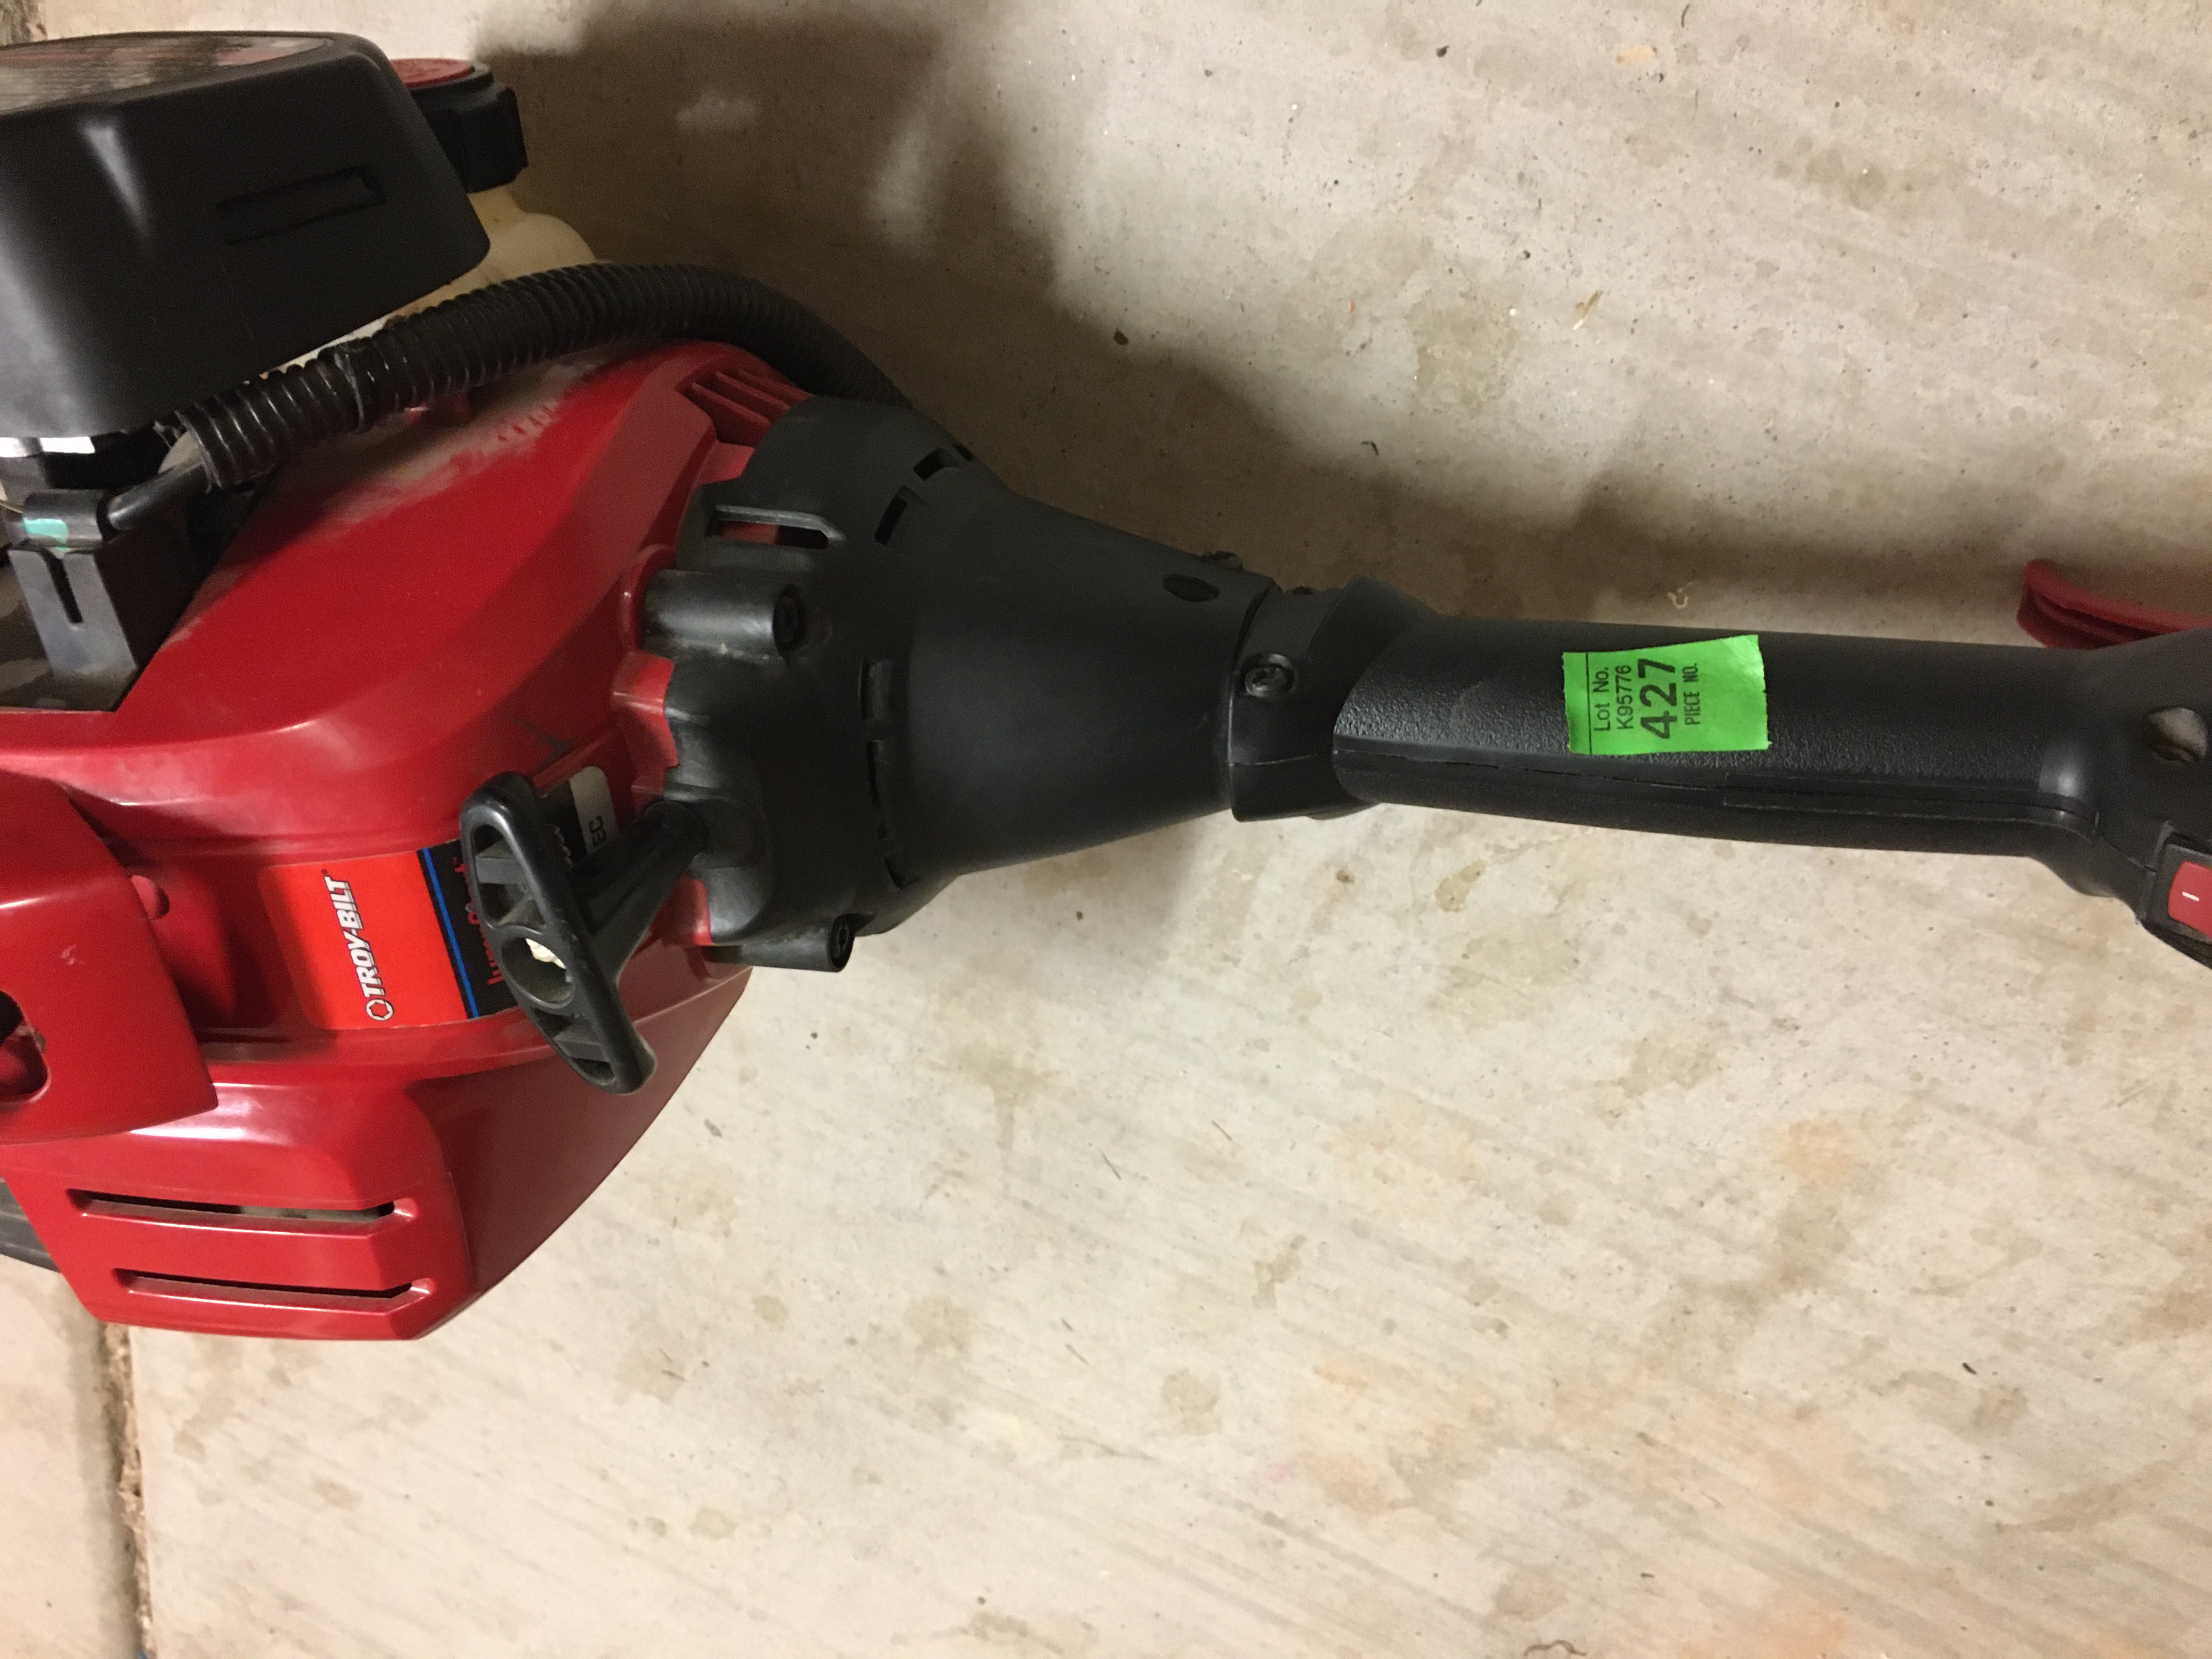 This is the bogus replacement for a stolen tool